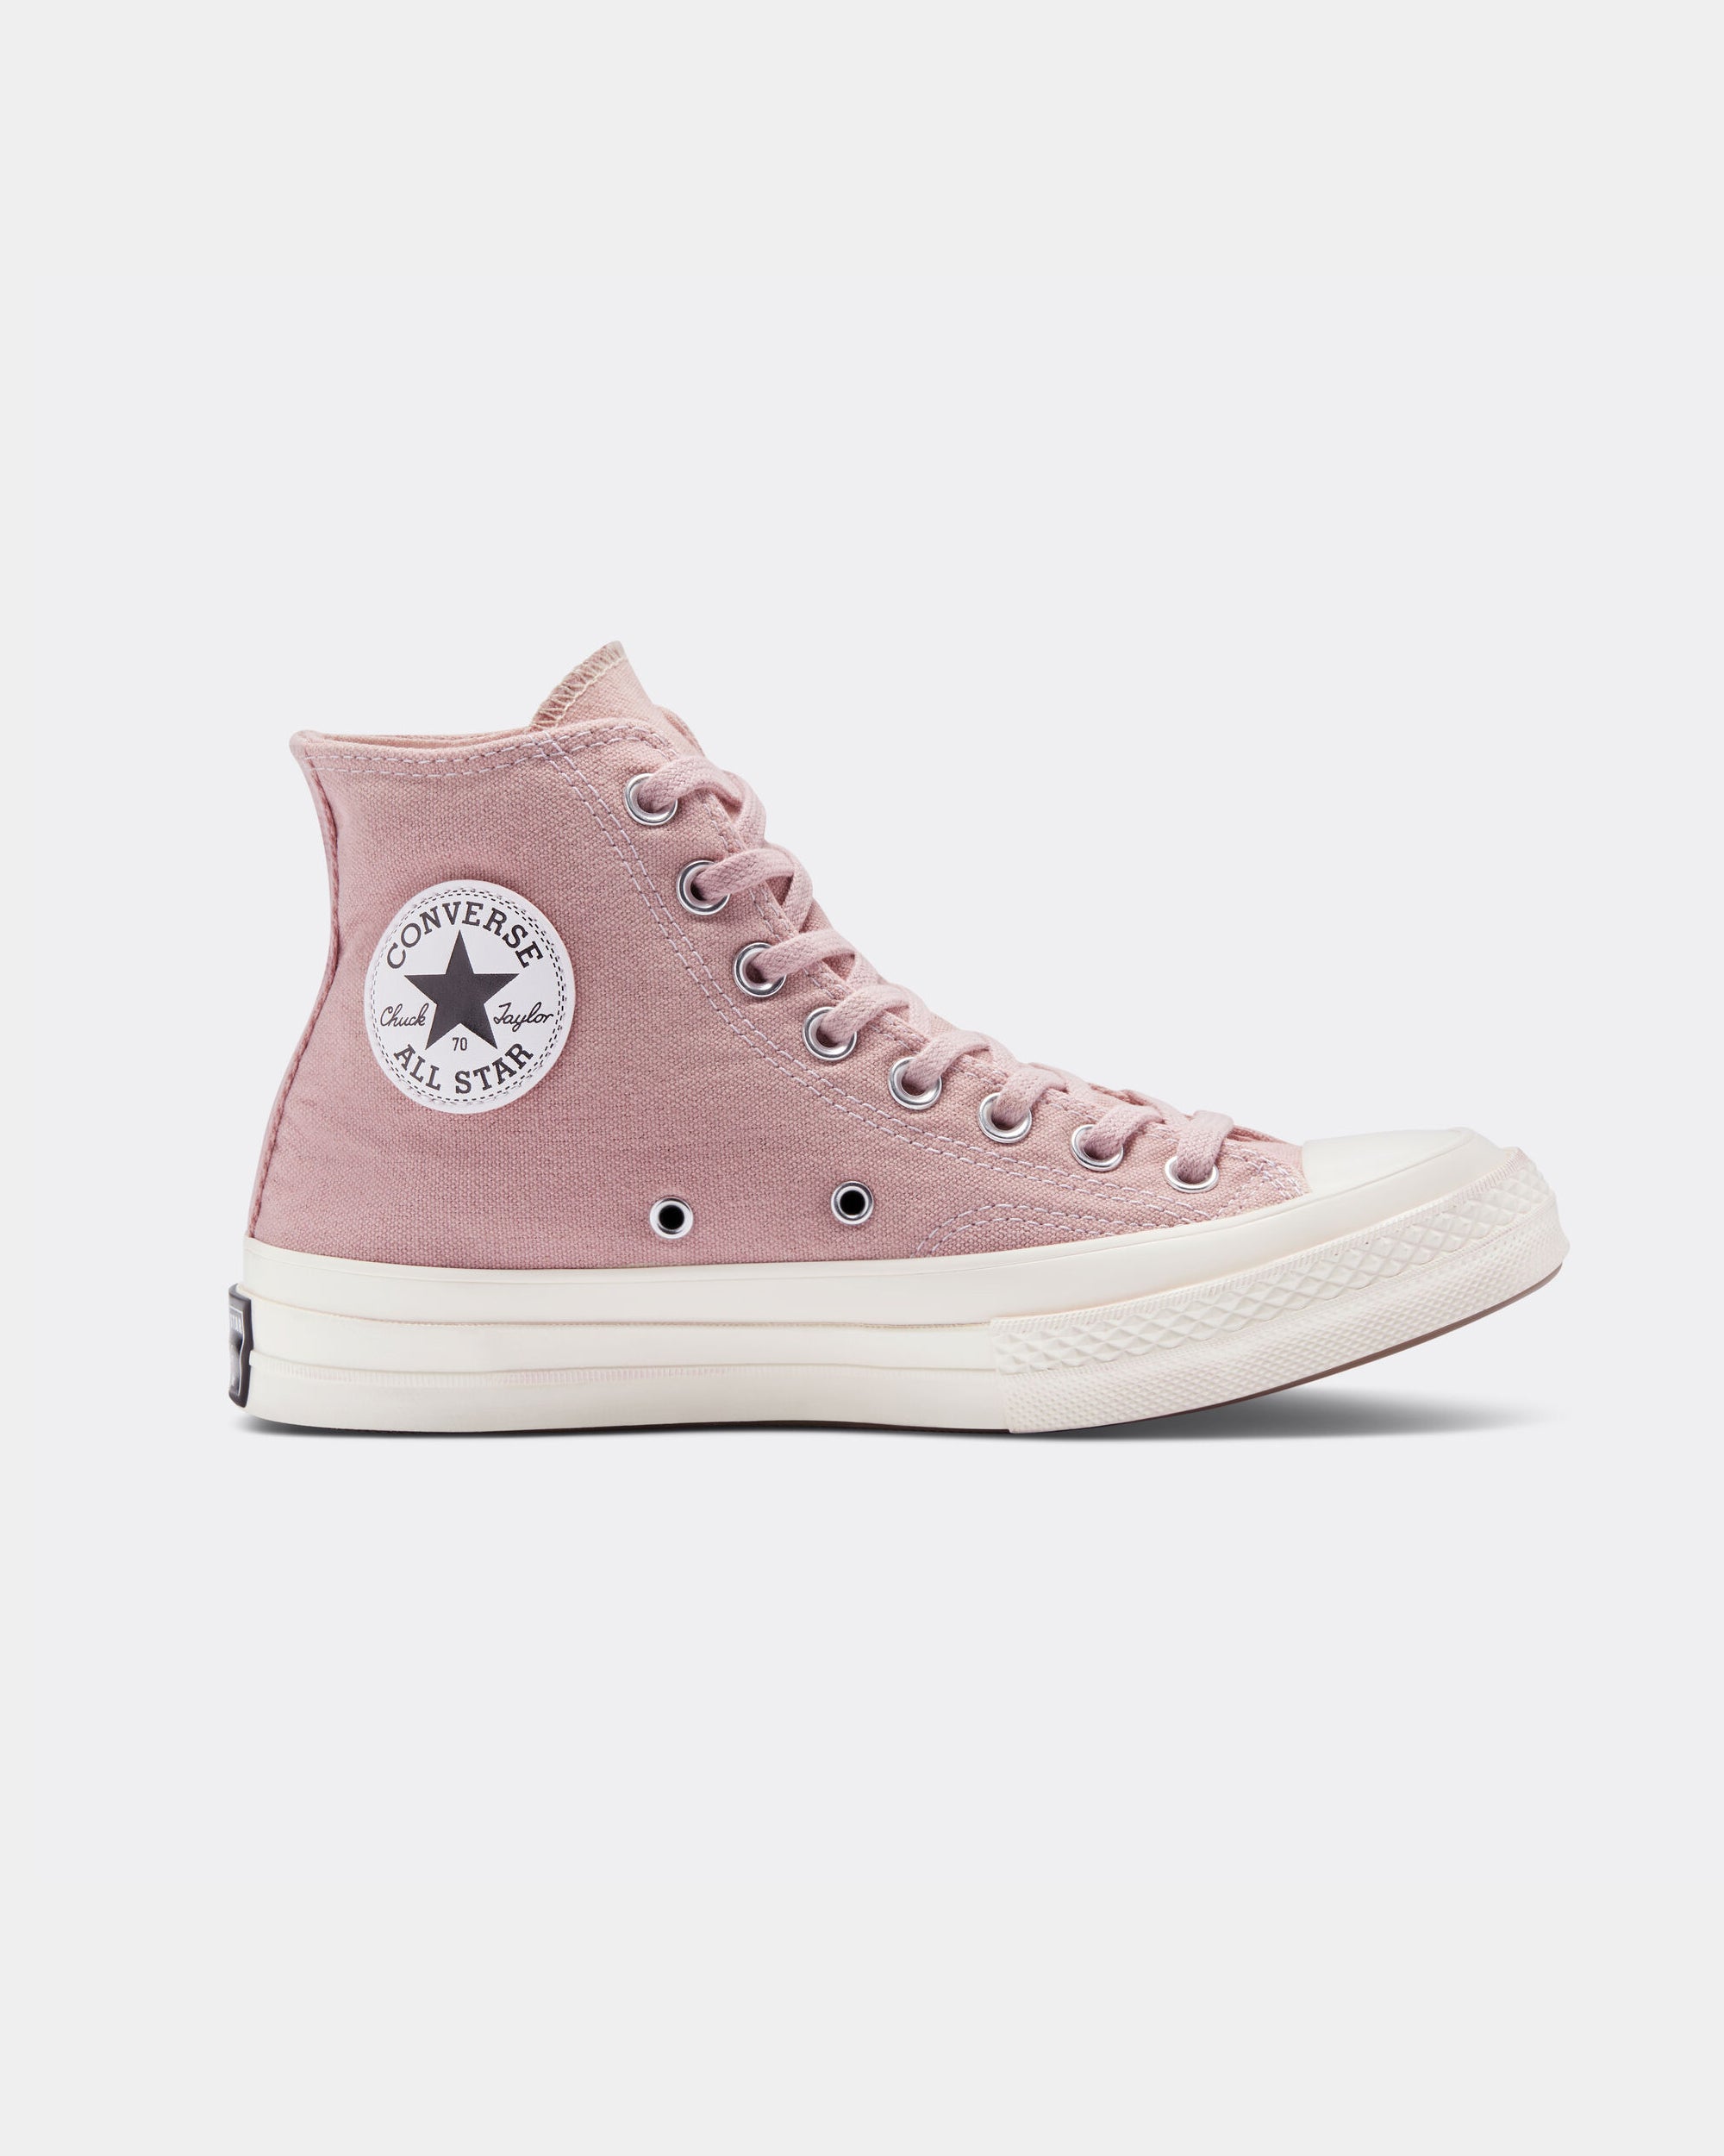 Converse Chuck 70 Hi Strawberry Dyed Sneakers Unisex